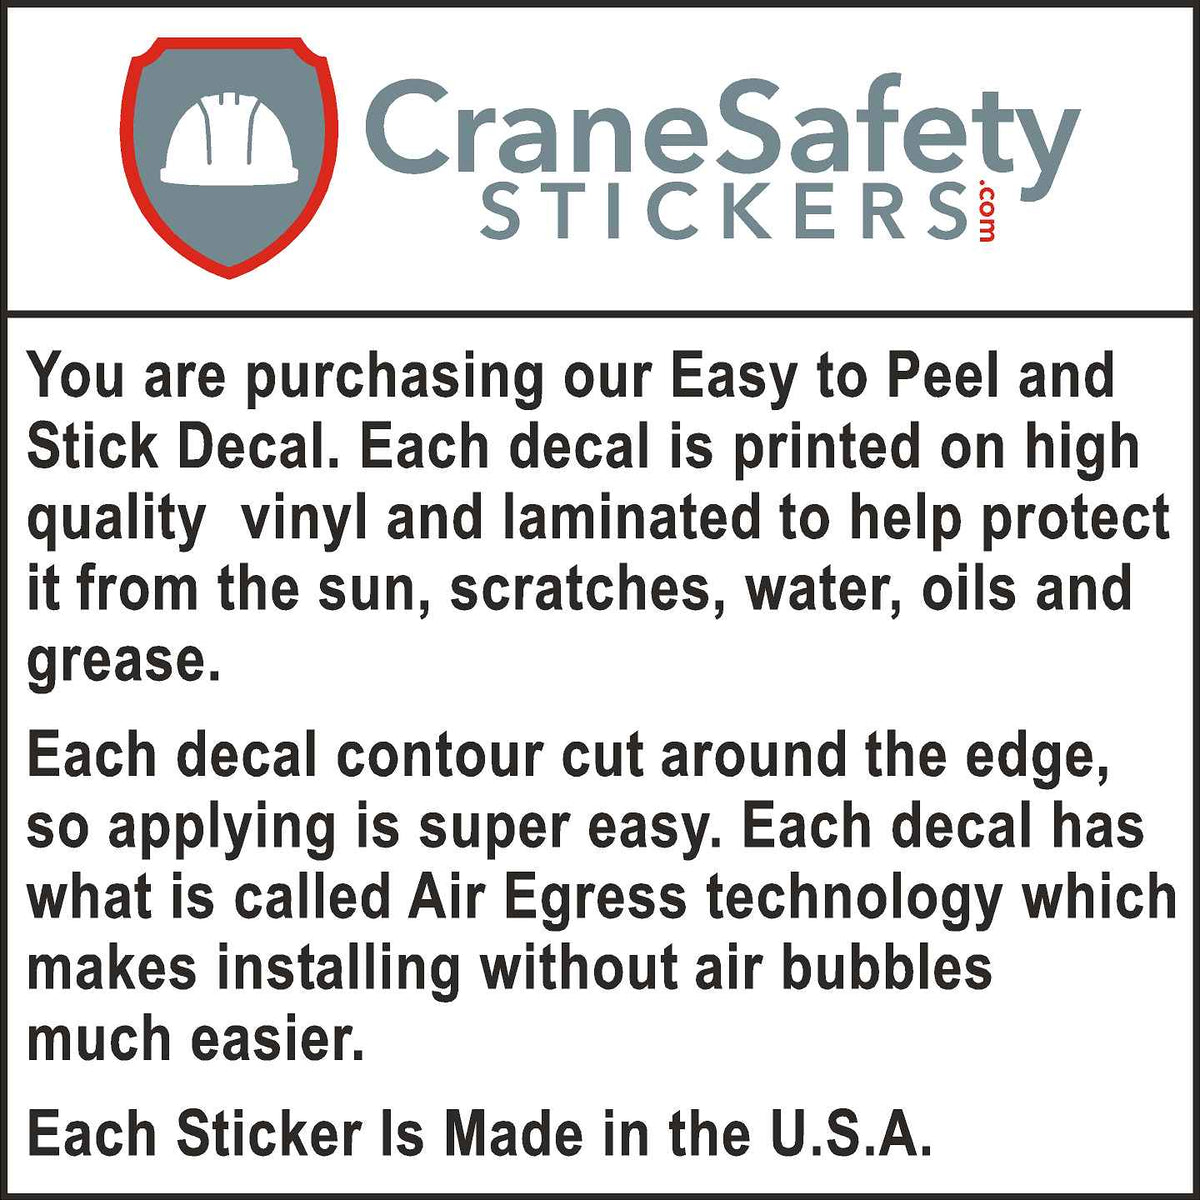 Quality of our safety protects people quality protects jobs stickers.